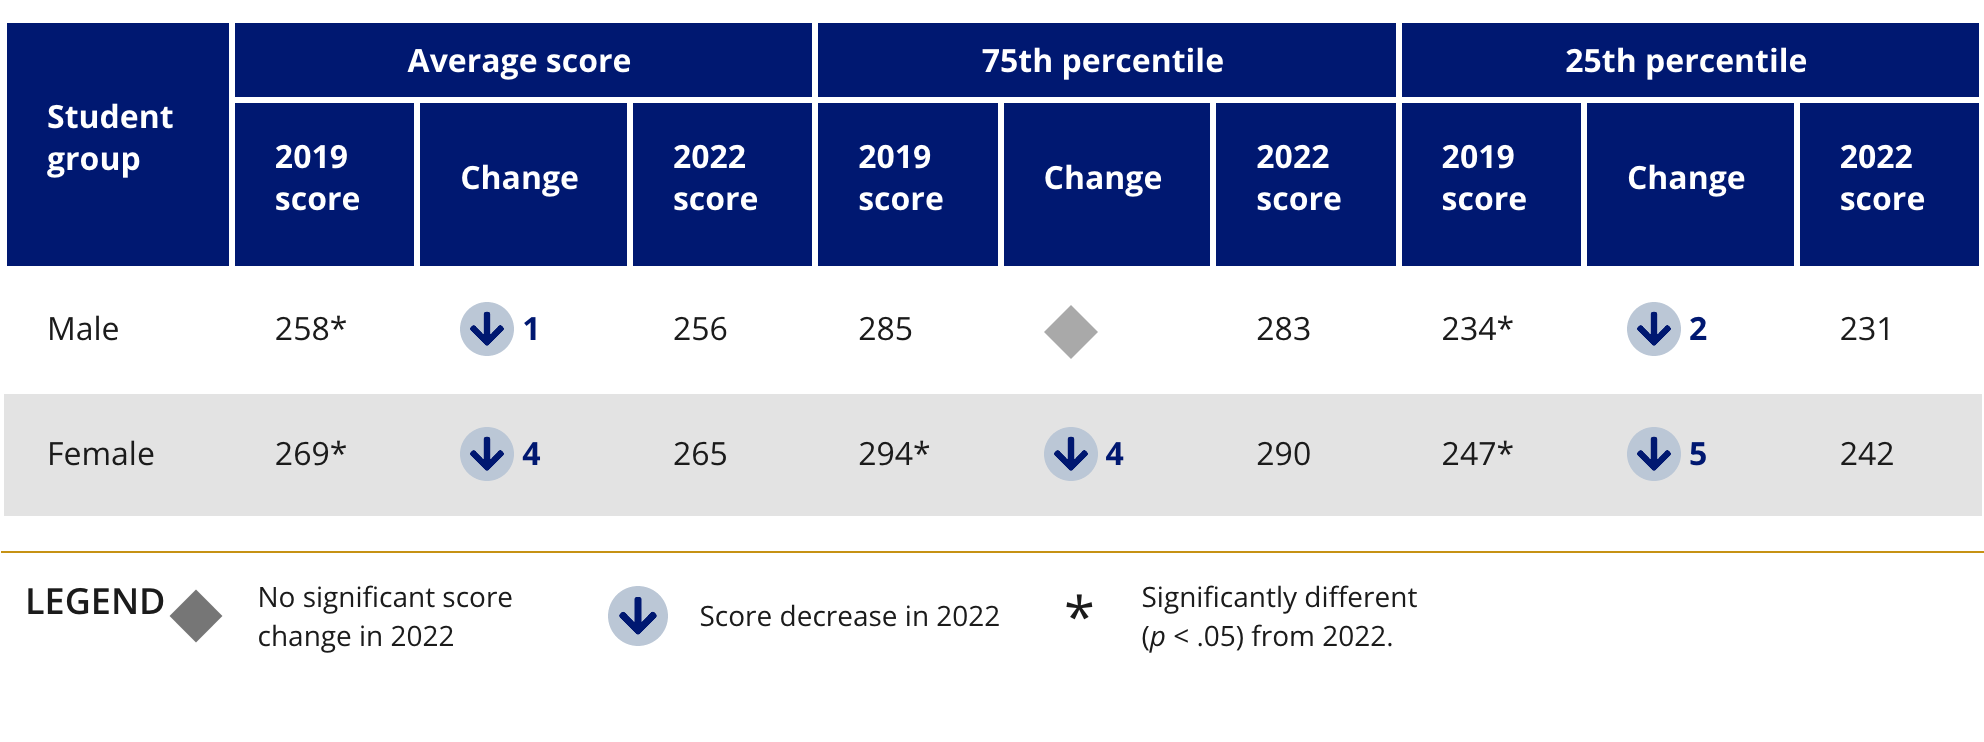 Changes in Eighth-Grade NAEP Reading Scores Between 2019 and 2022, by Gender